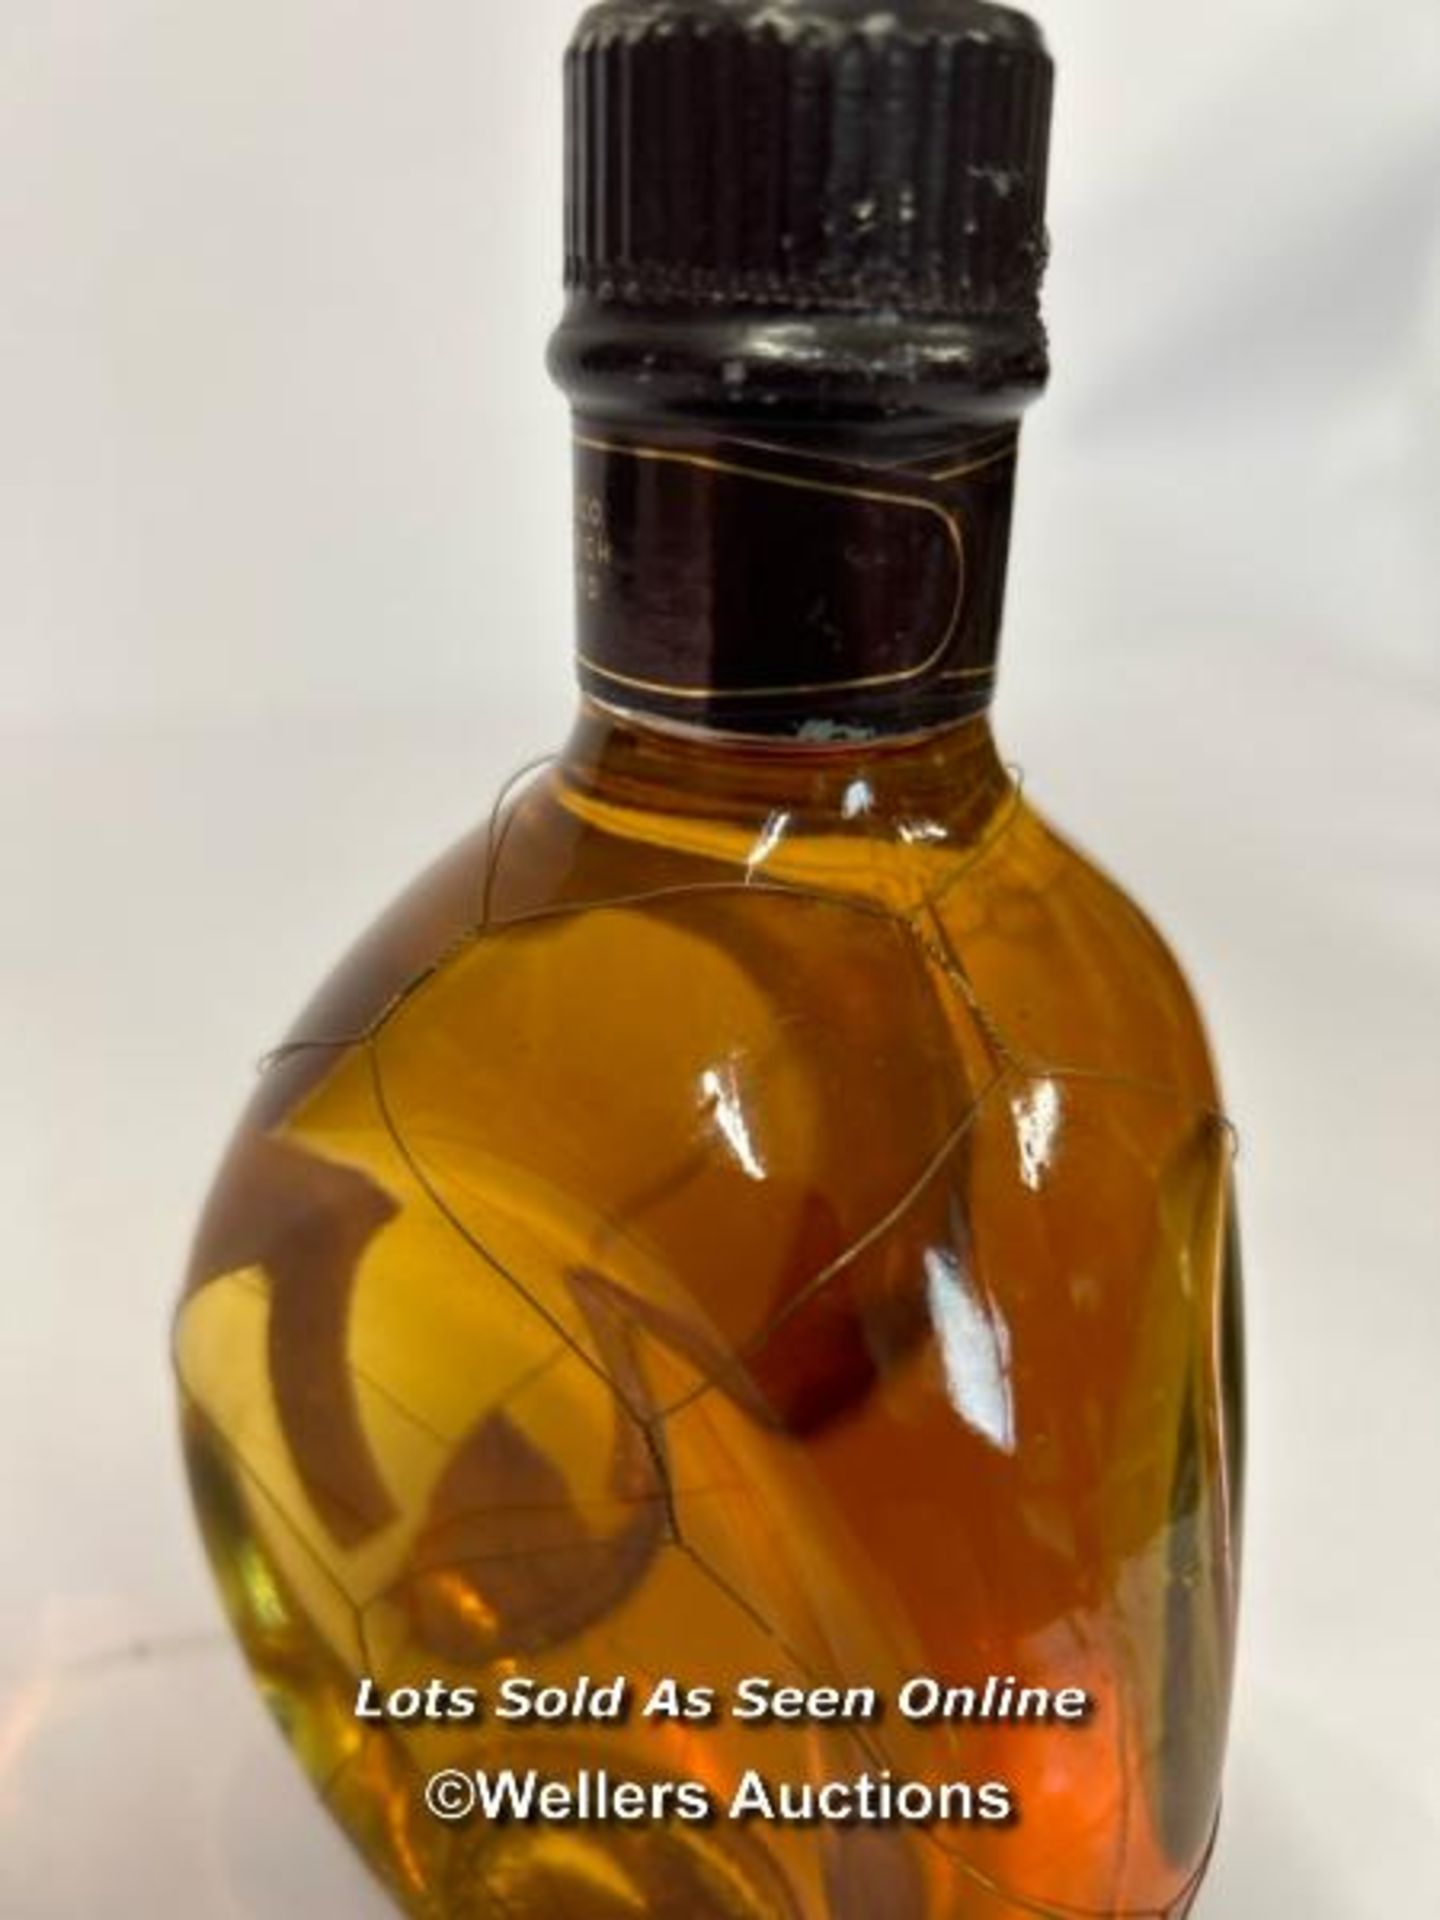 Dimple Haig 12yr whisky in decorative pewter bottle (opened) with a bottle of Dimple 15yr whisky, - Image 5 of 5